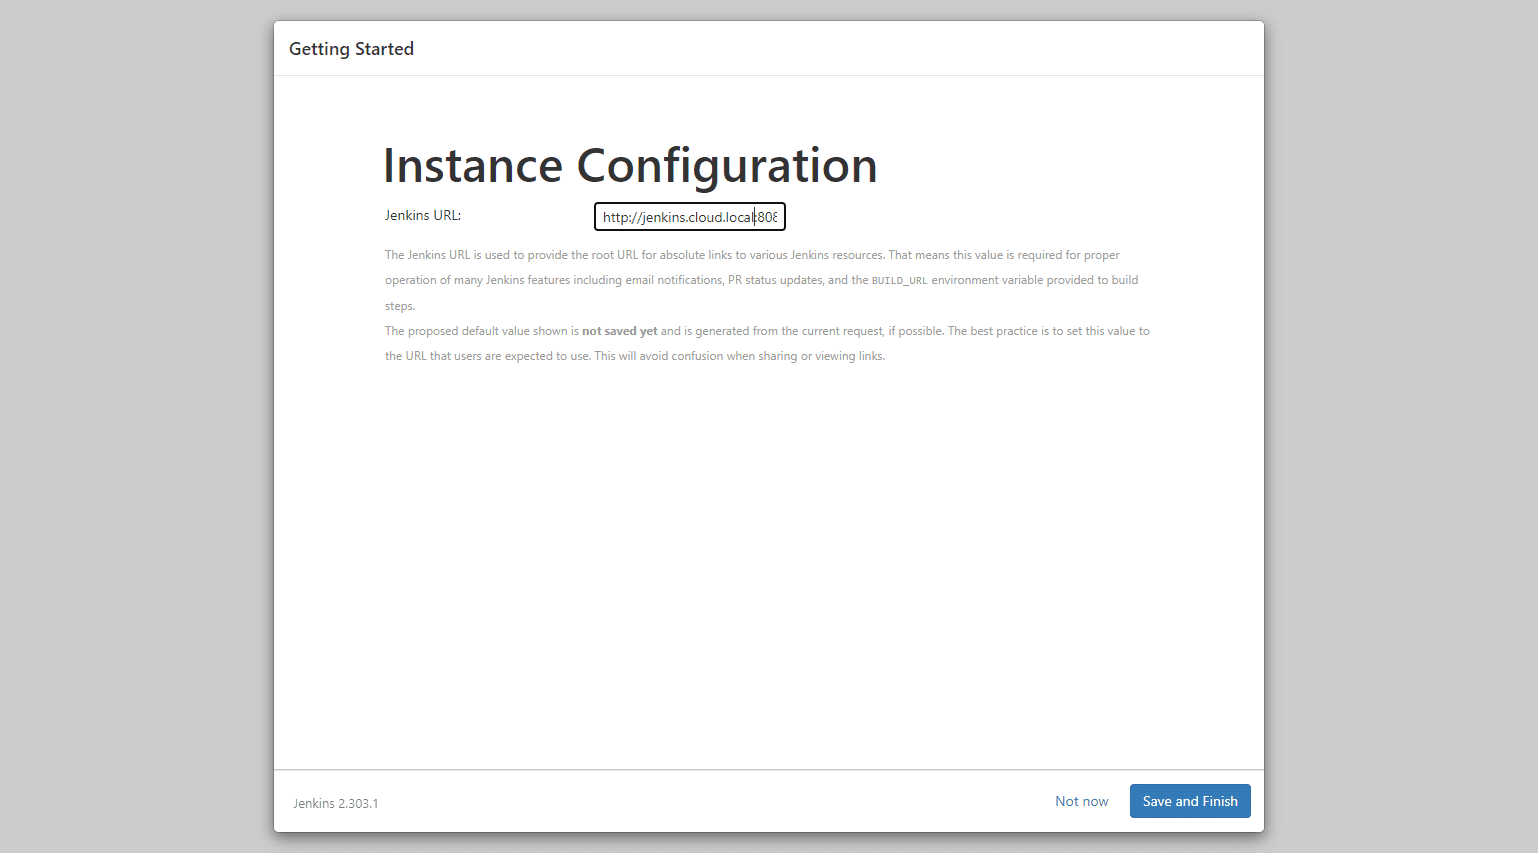 Configure the instance configuration including the base URL